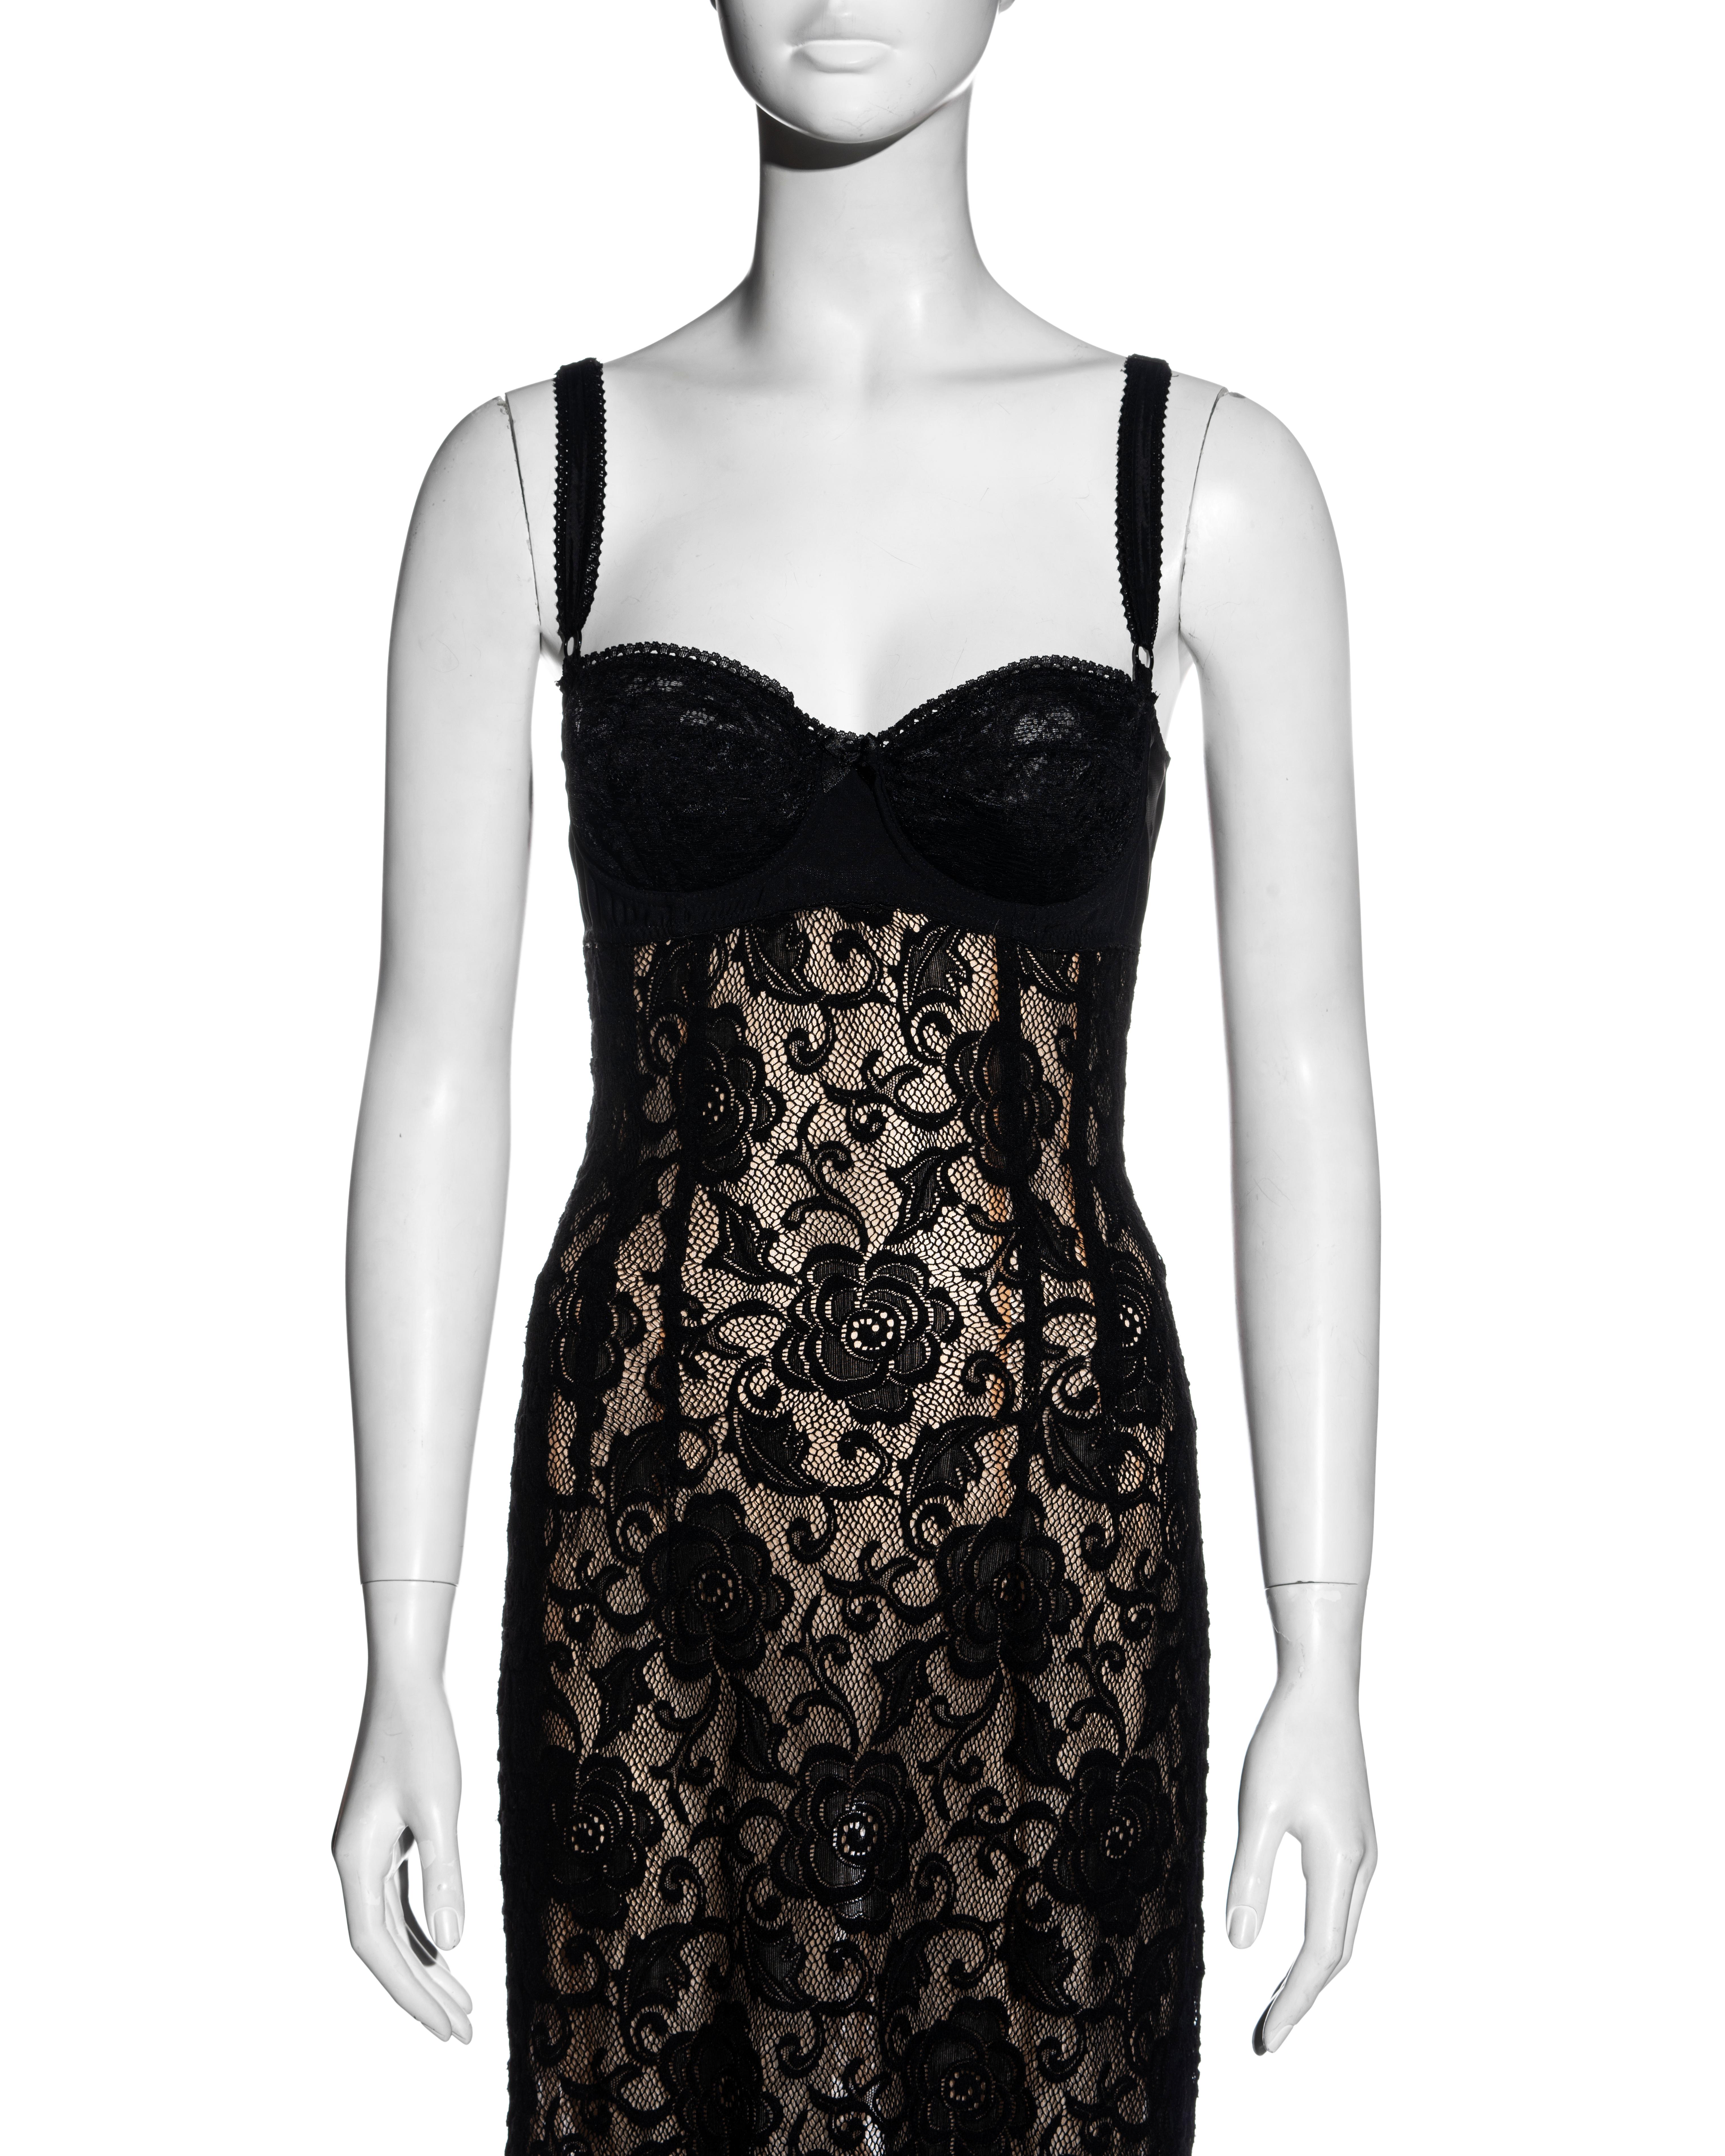 Dolce & Gabbana black lace evening dress with attached bra, ss 1997 In Excellent Condition For Sale In London, GB